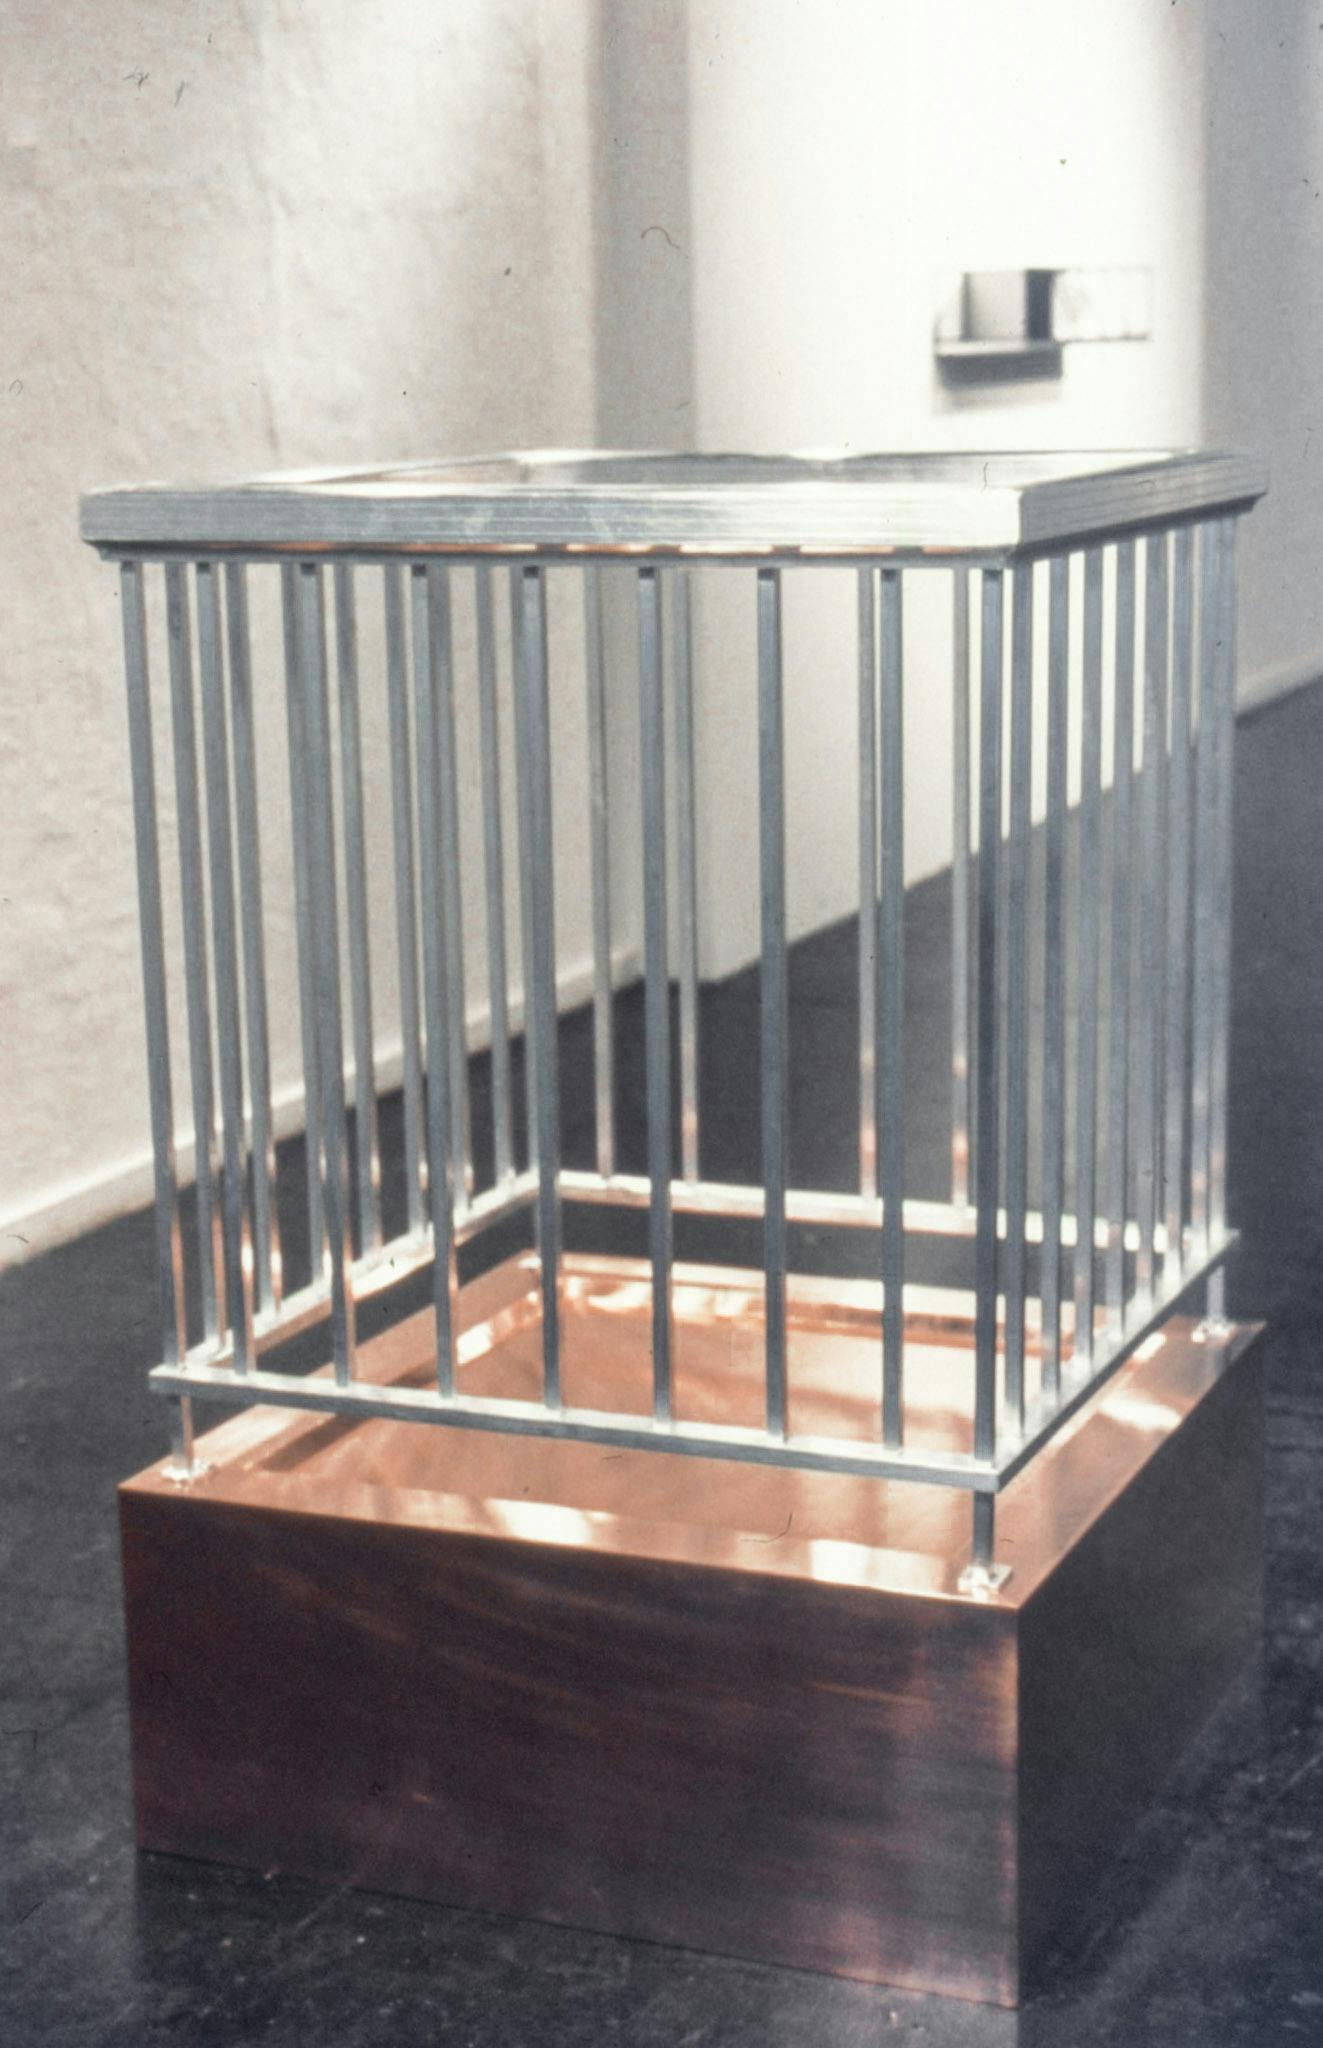 A closeup of an artwork in a gallery. The work is made of a low copper box with a tall silver metal rail attached to the top of the box. Behind it, a work mounted on the white wall is visible.